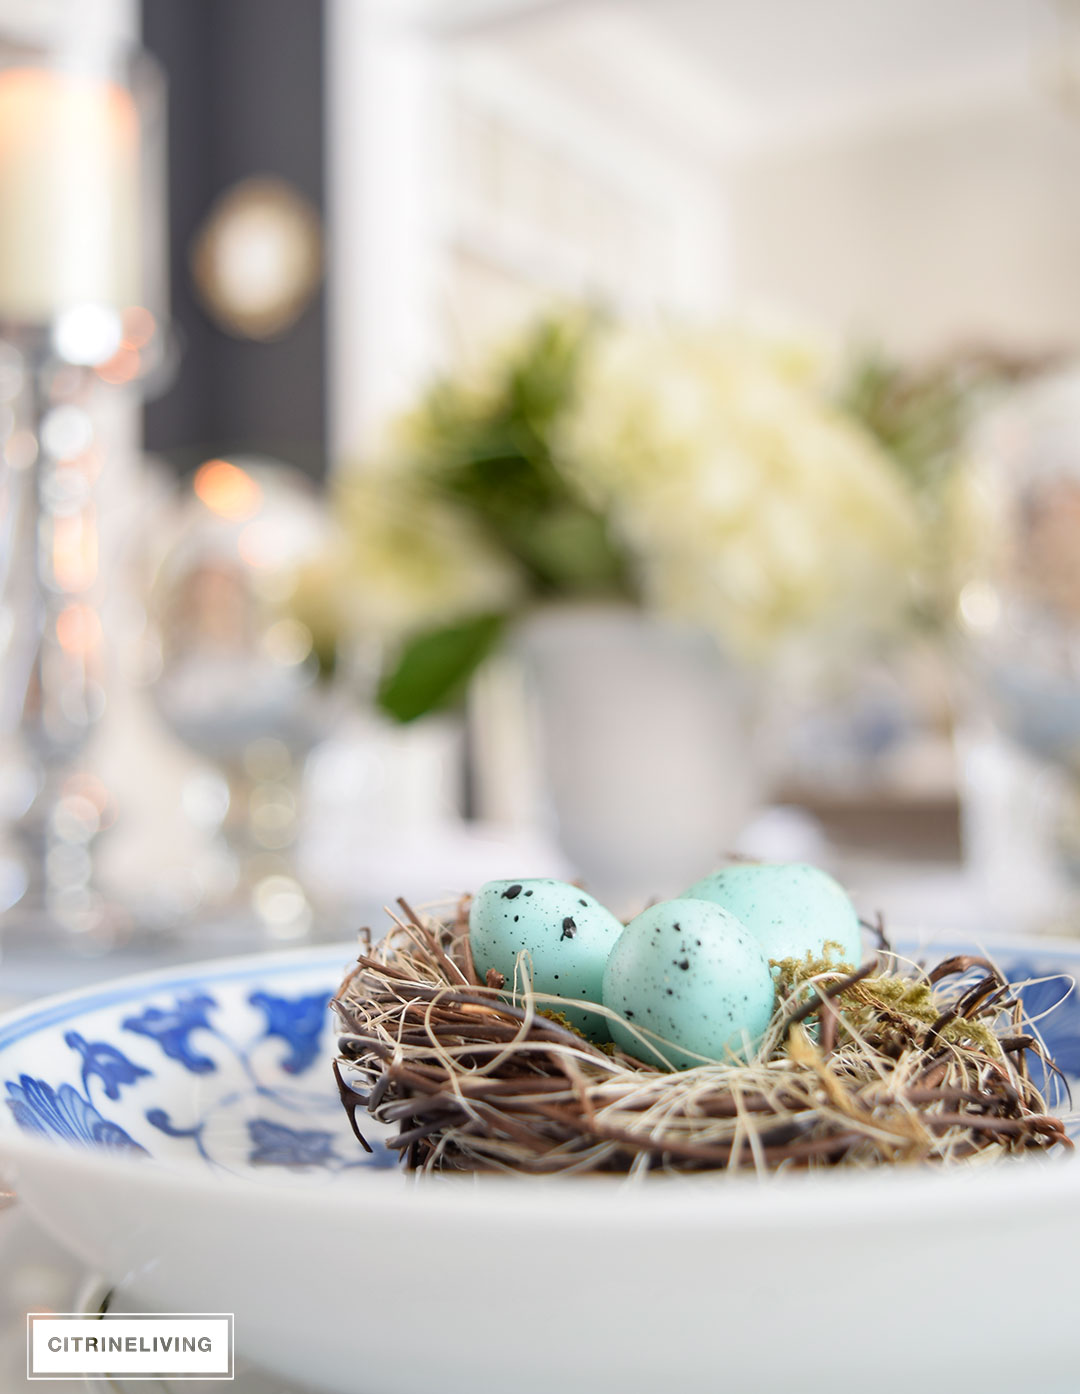 Easter or Spring table setting with pale turquoise eggs atop a mix of blue and white and silver china.